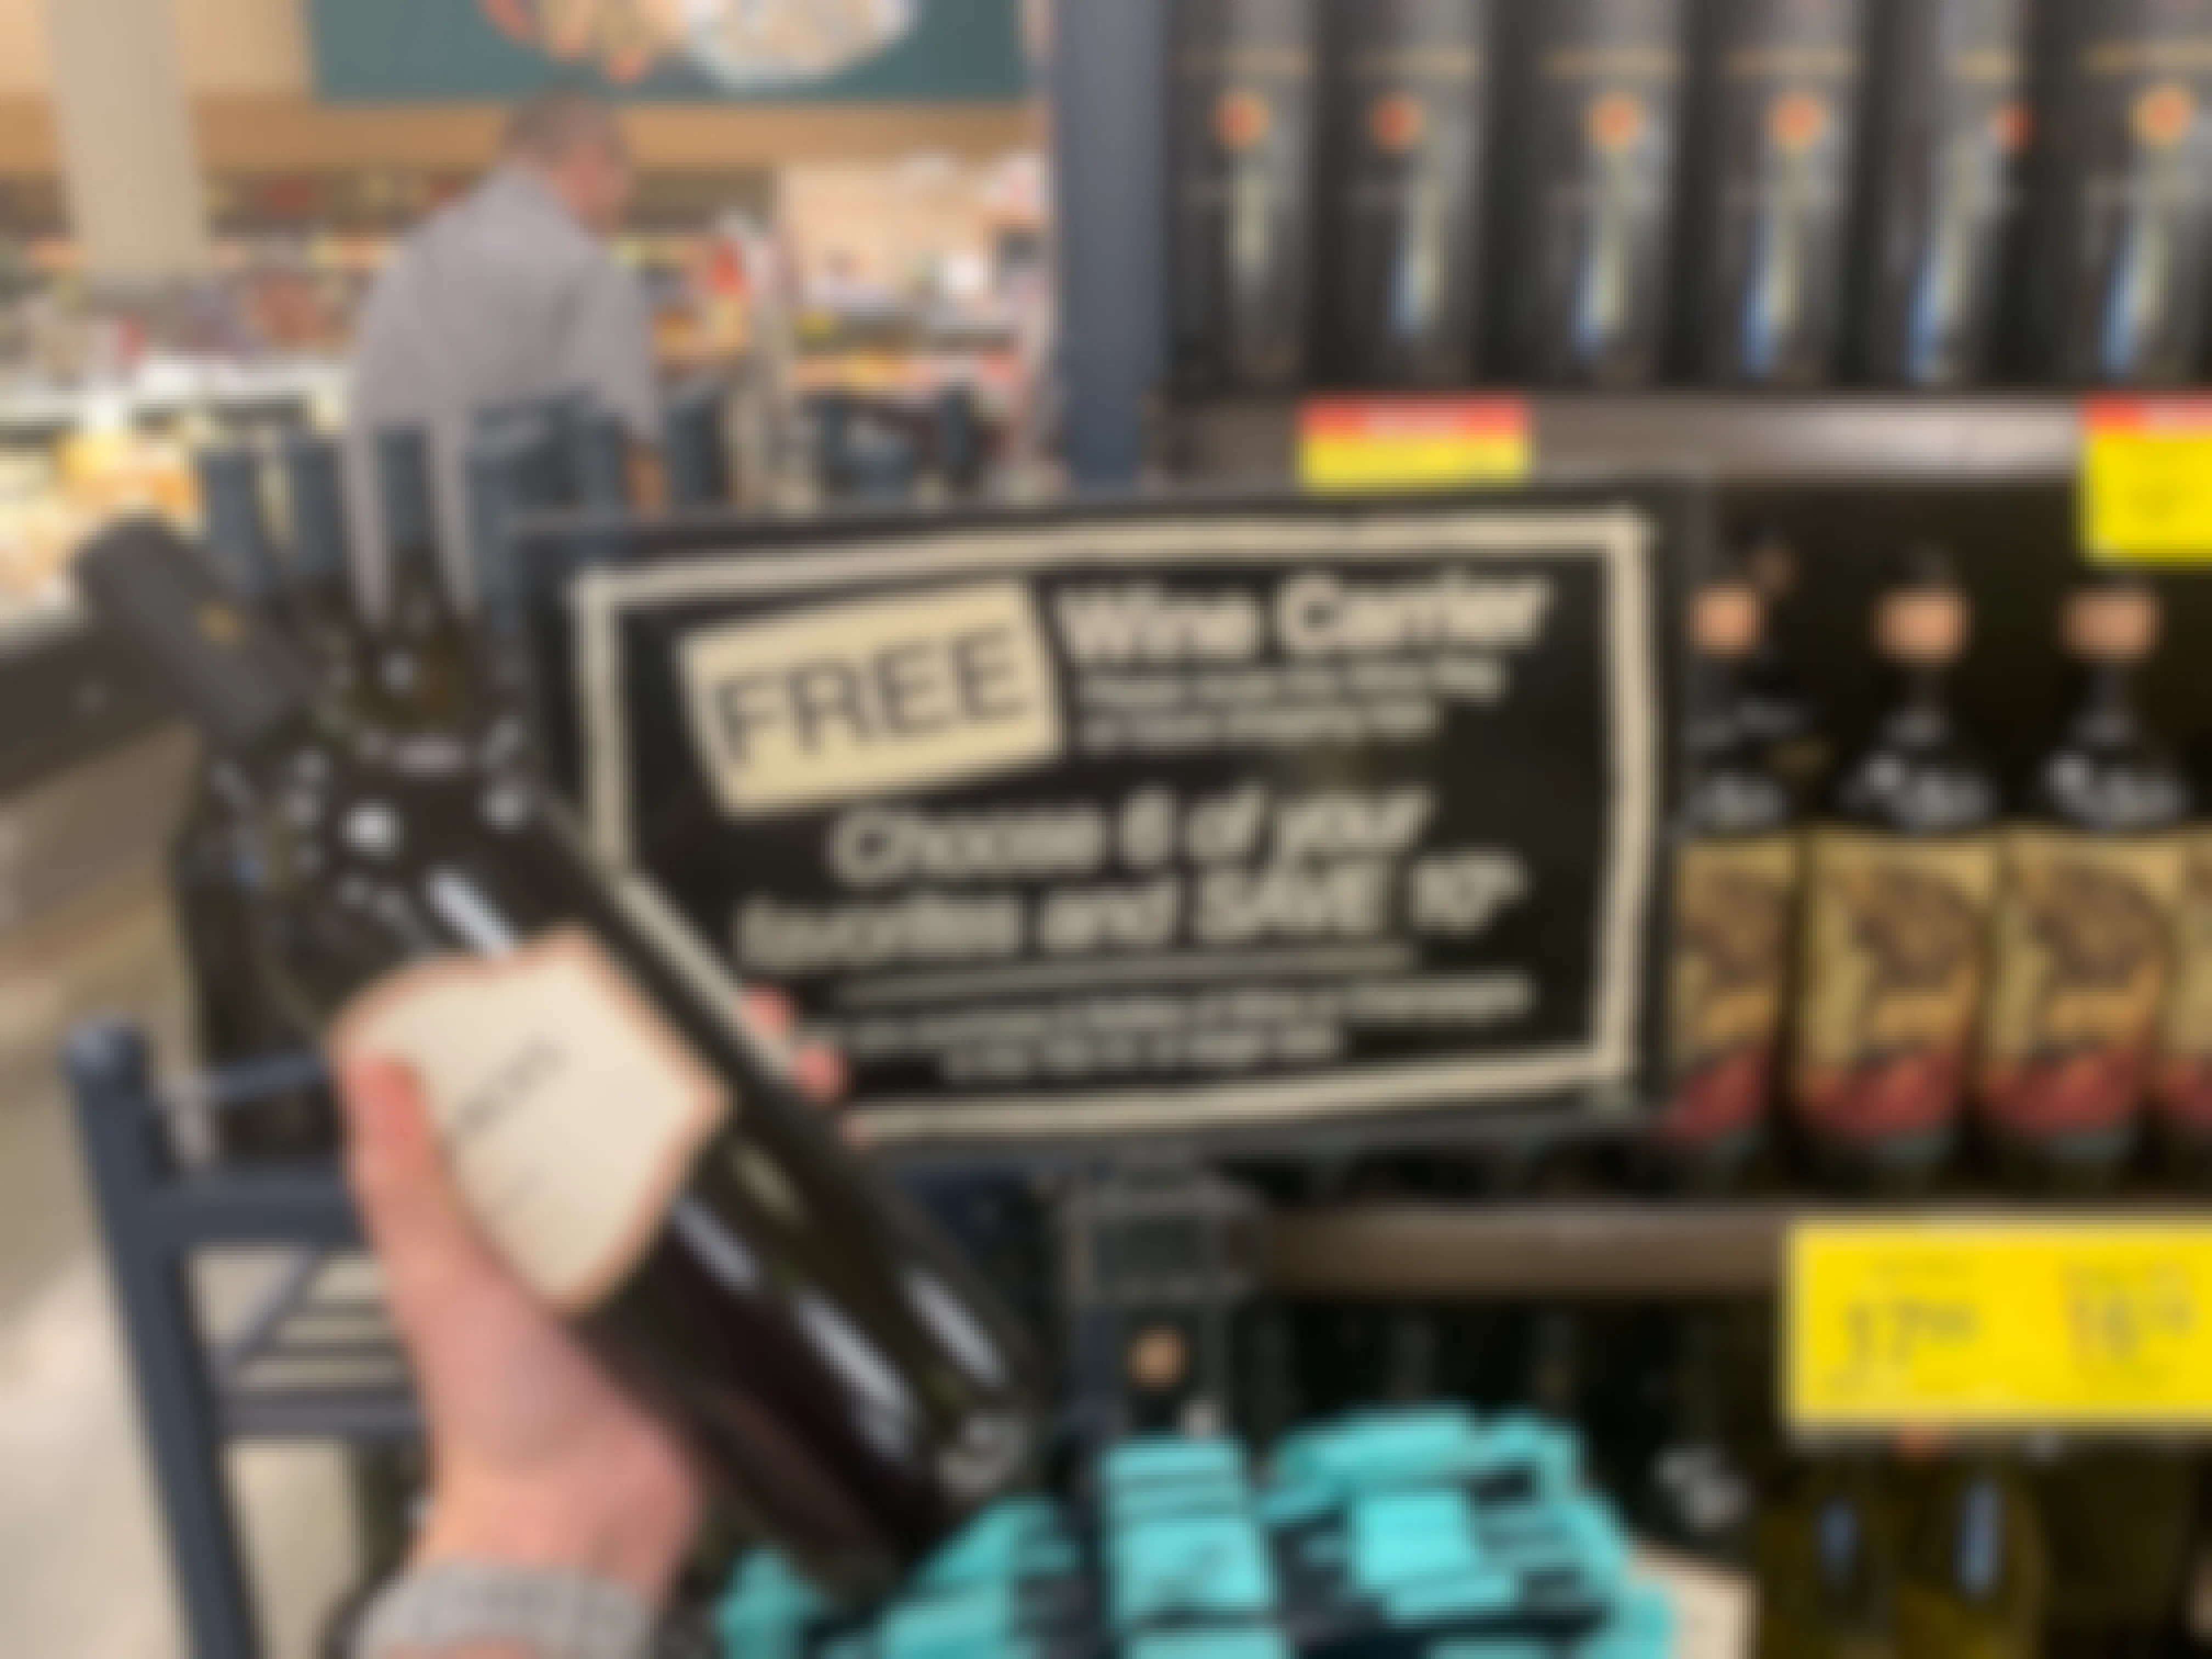 Save 10-20% on wine when you buy 6 or more bottles at Kroger.